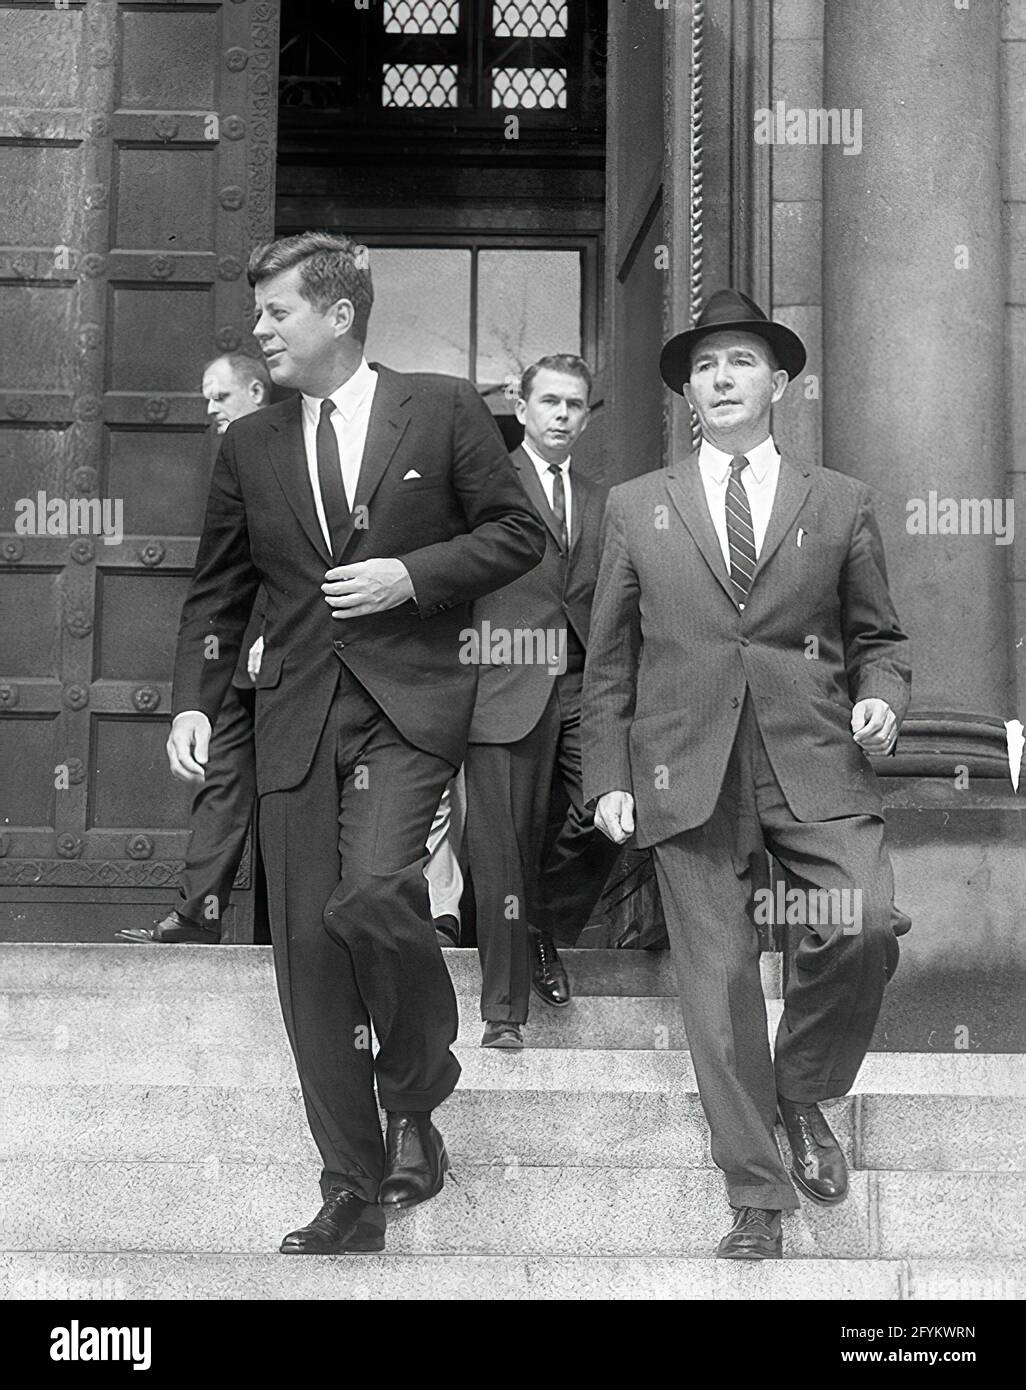 1 November 1961 President John F. Kennedy departs the Cathedral of St. Matthew the Apostle (St. Matthew’s Cathedral) after attending a Mass in observance of All Saints Day. (L-R) President Kennedy, Secret Service Agent Bill Payne, and Special Assistant to the President Dave Powers. Washington, D.C. Stock Photo